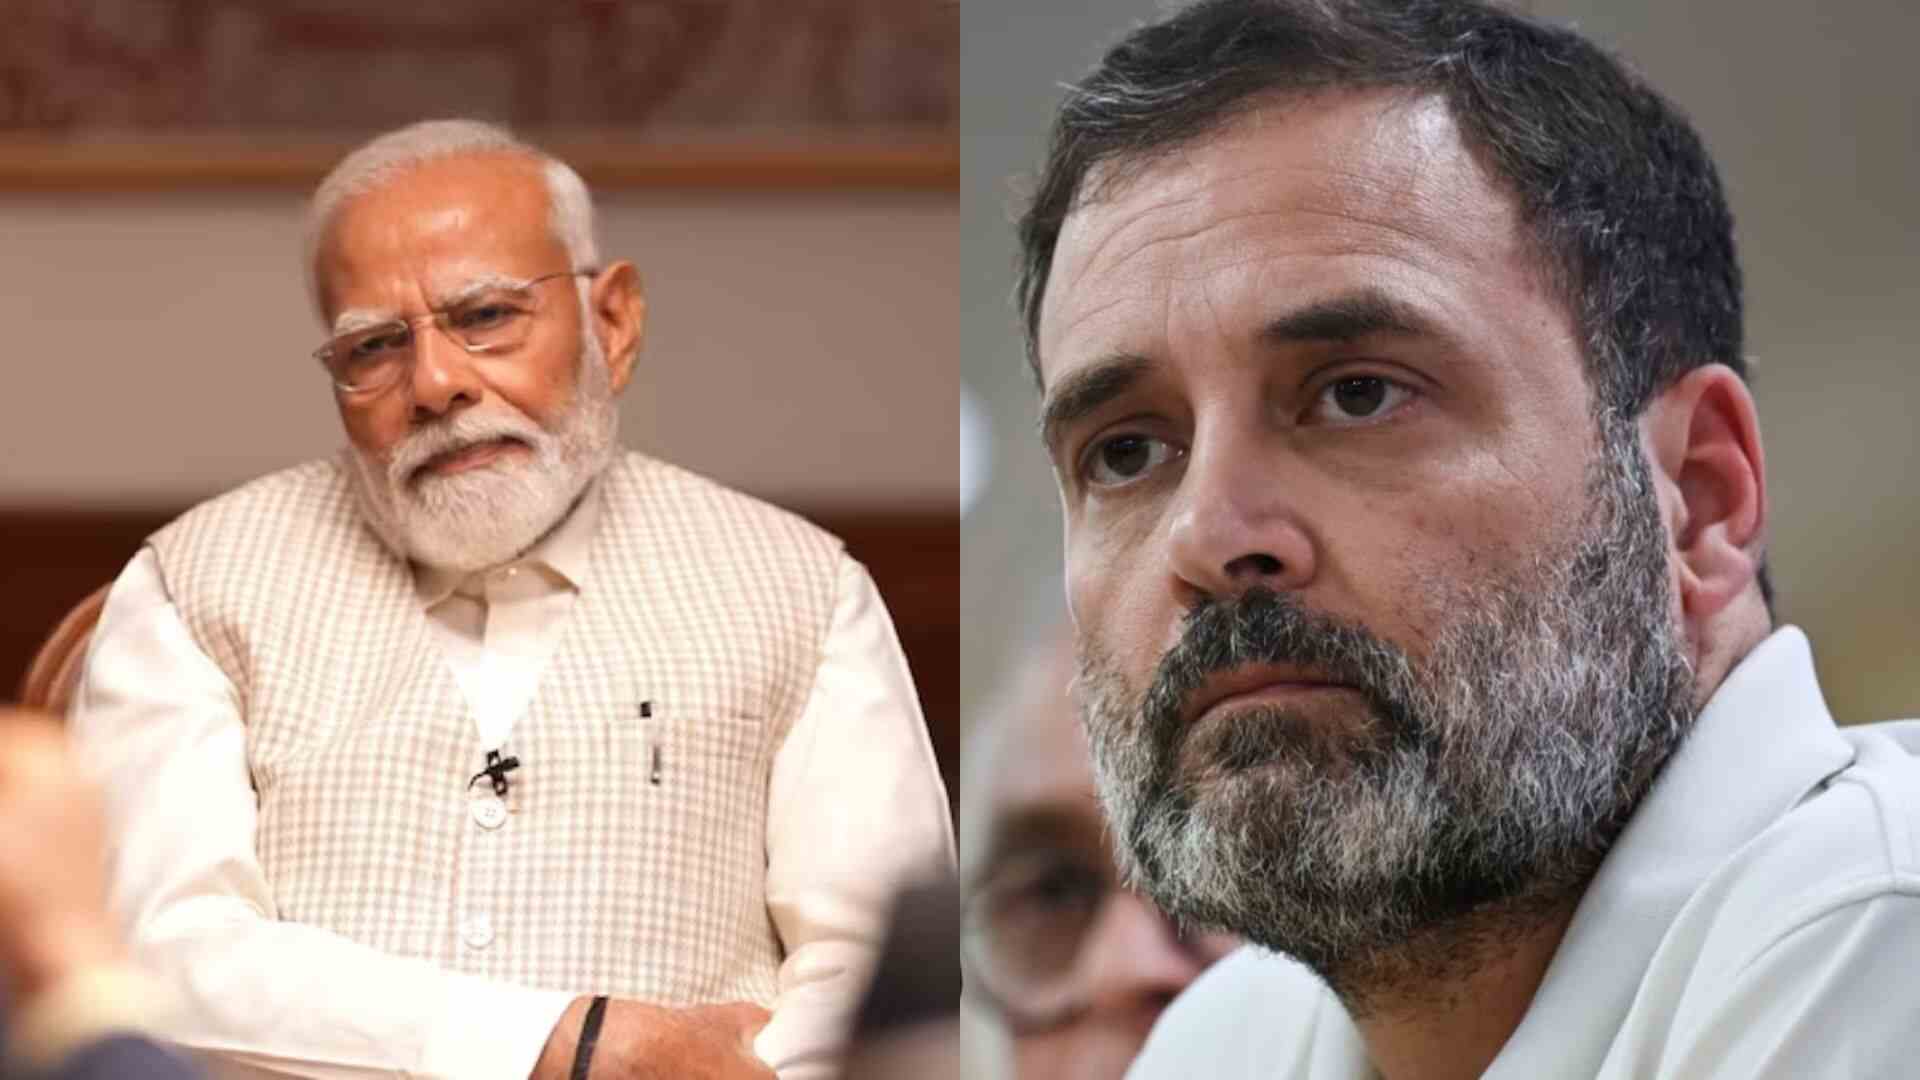 PM Modi, Rahul Gandhi To Hold Major Election Rallies in Delhi On May 18